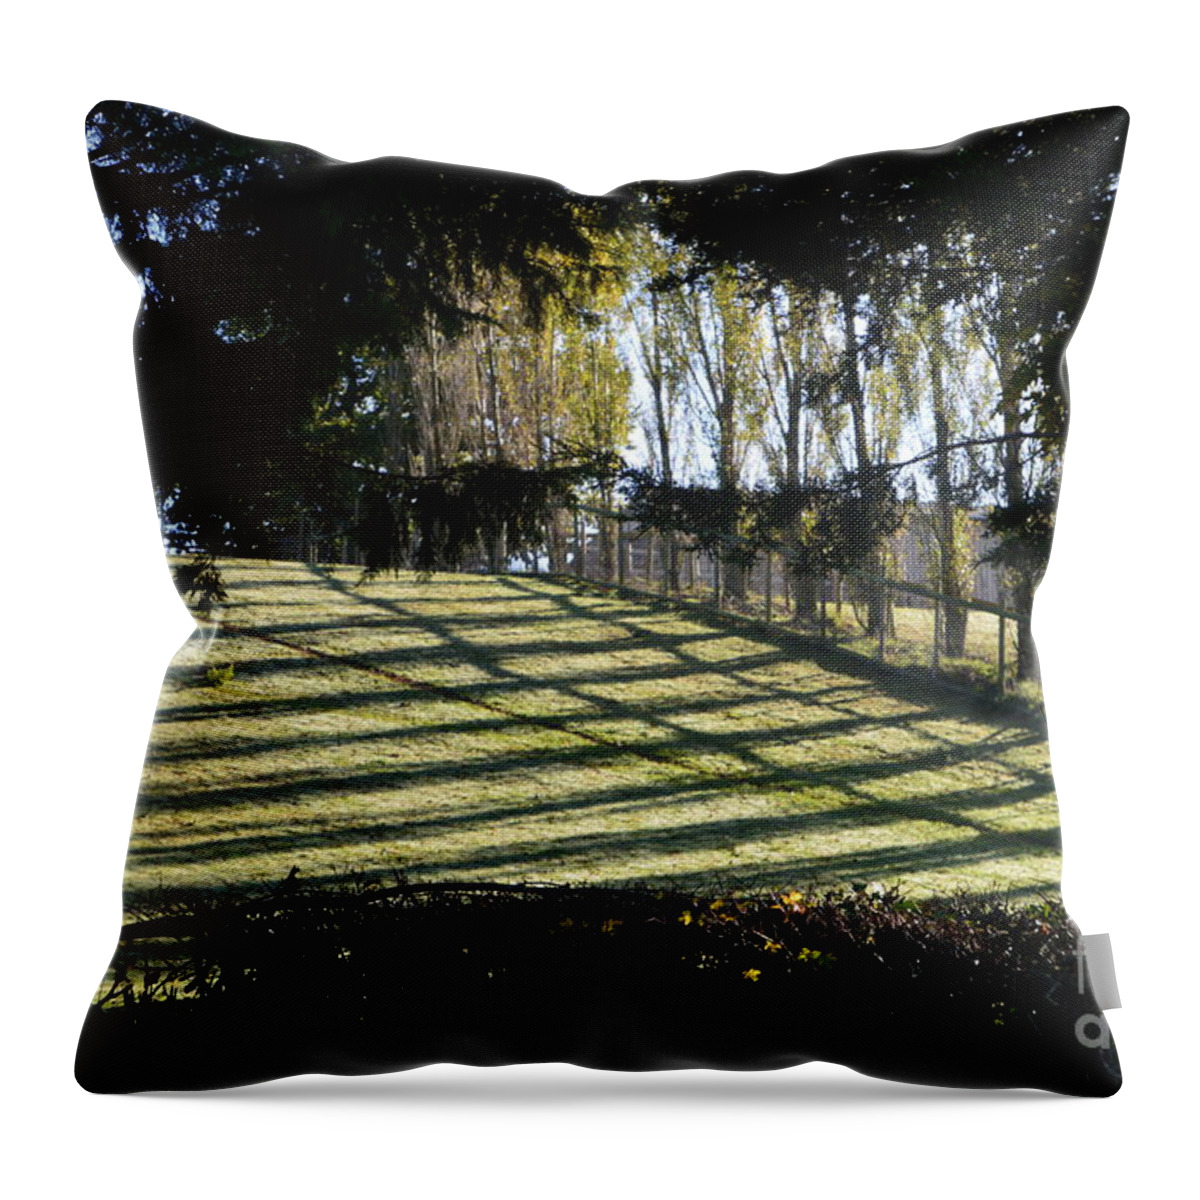 Shadows Throw Pillow featuring the photograph Shadows by Andy Thompson